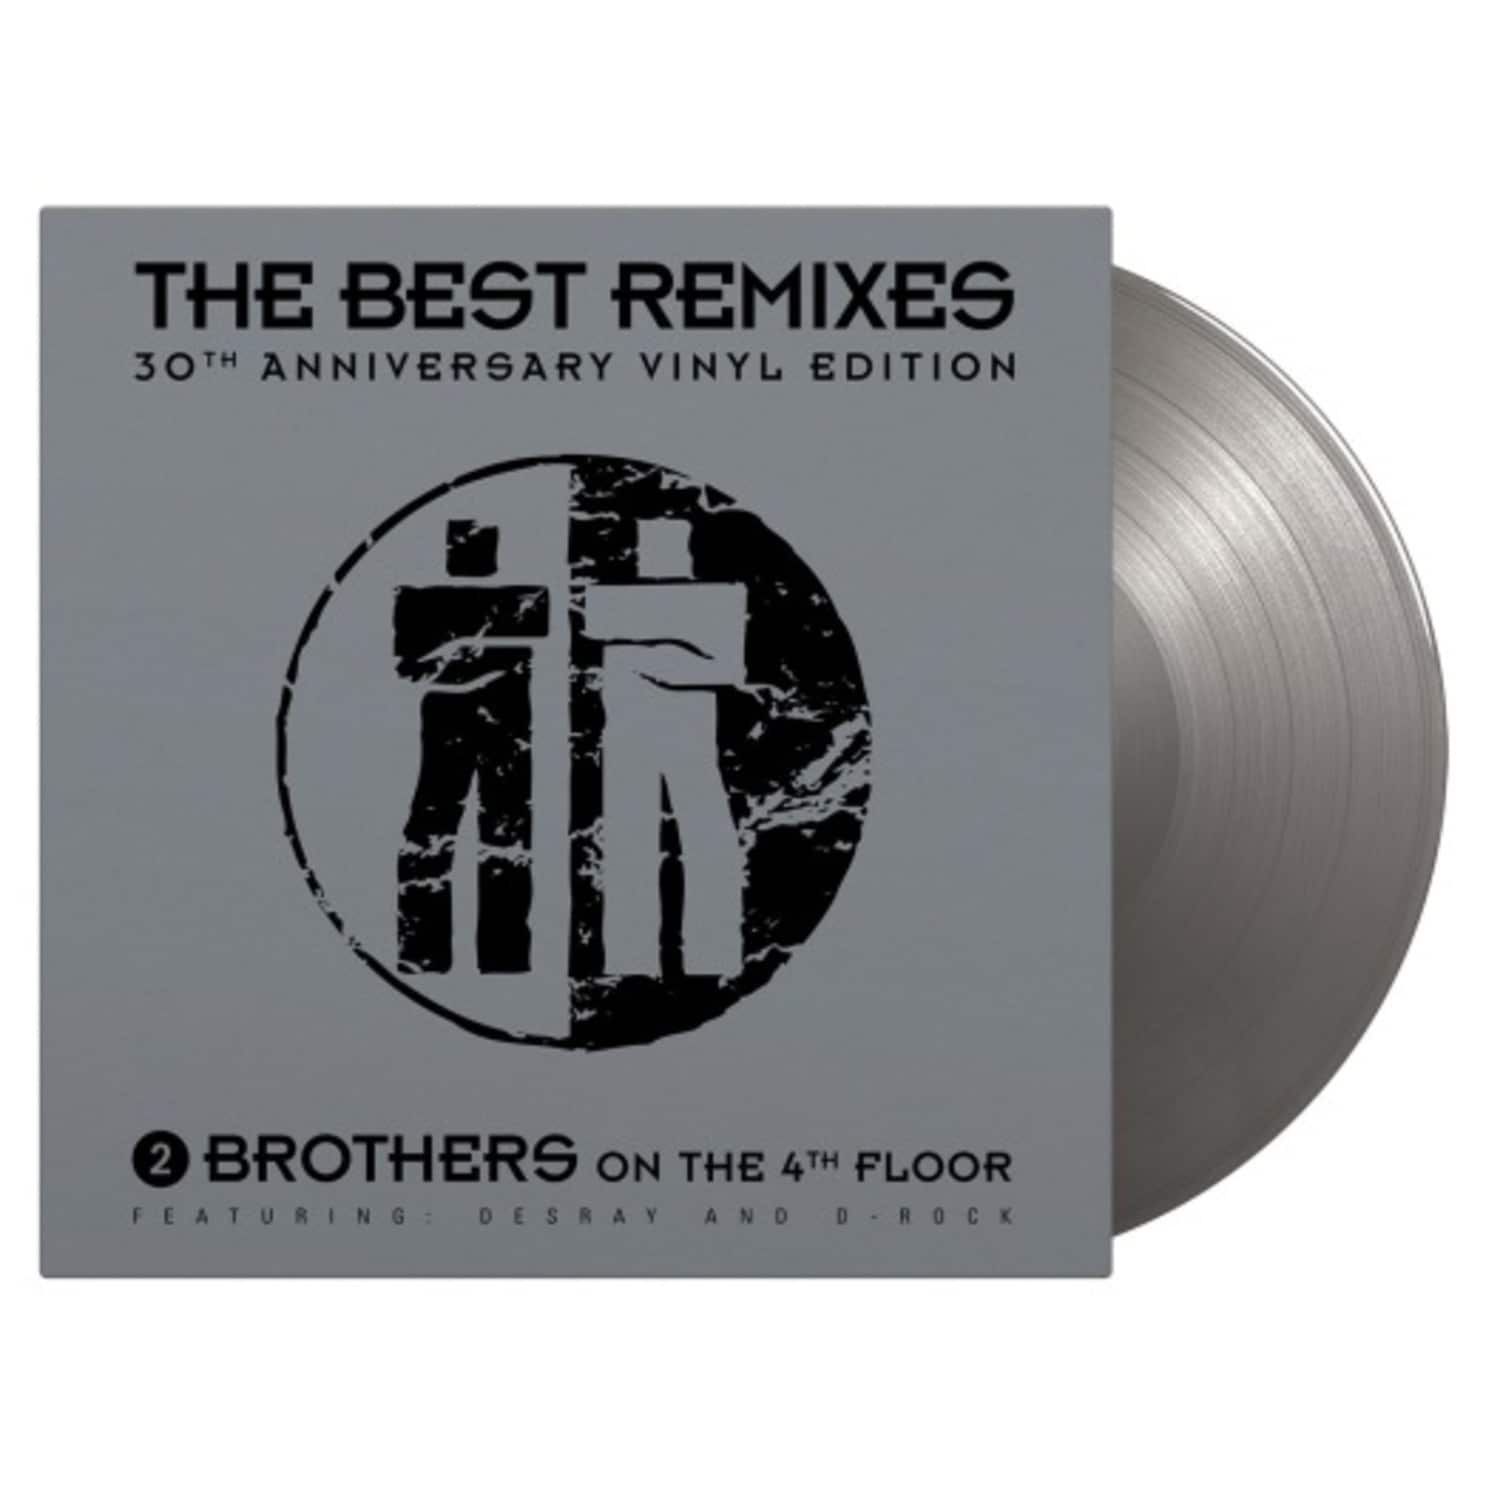 Two Brothers on the 4TH Floor - BEST REMIXES 